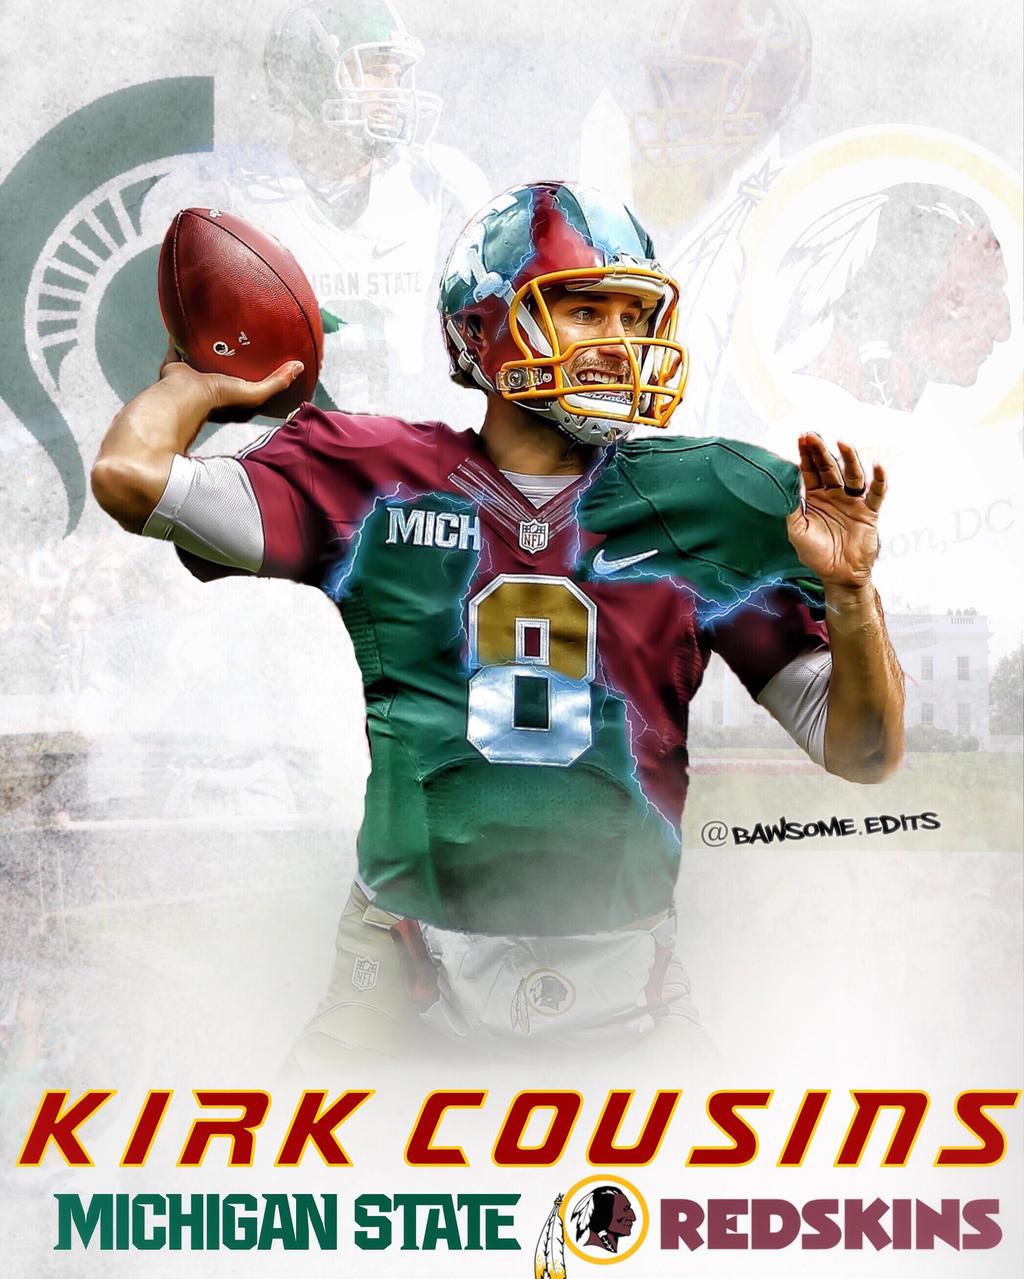 Kirk Cousins iPhone Wallpaper By Bawsomeedits